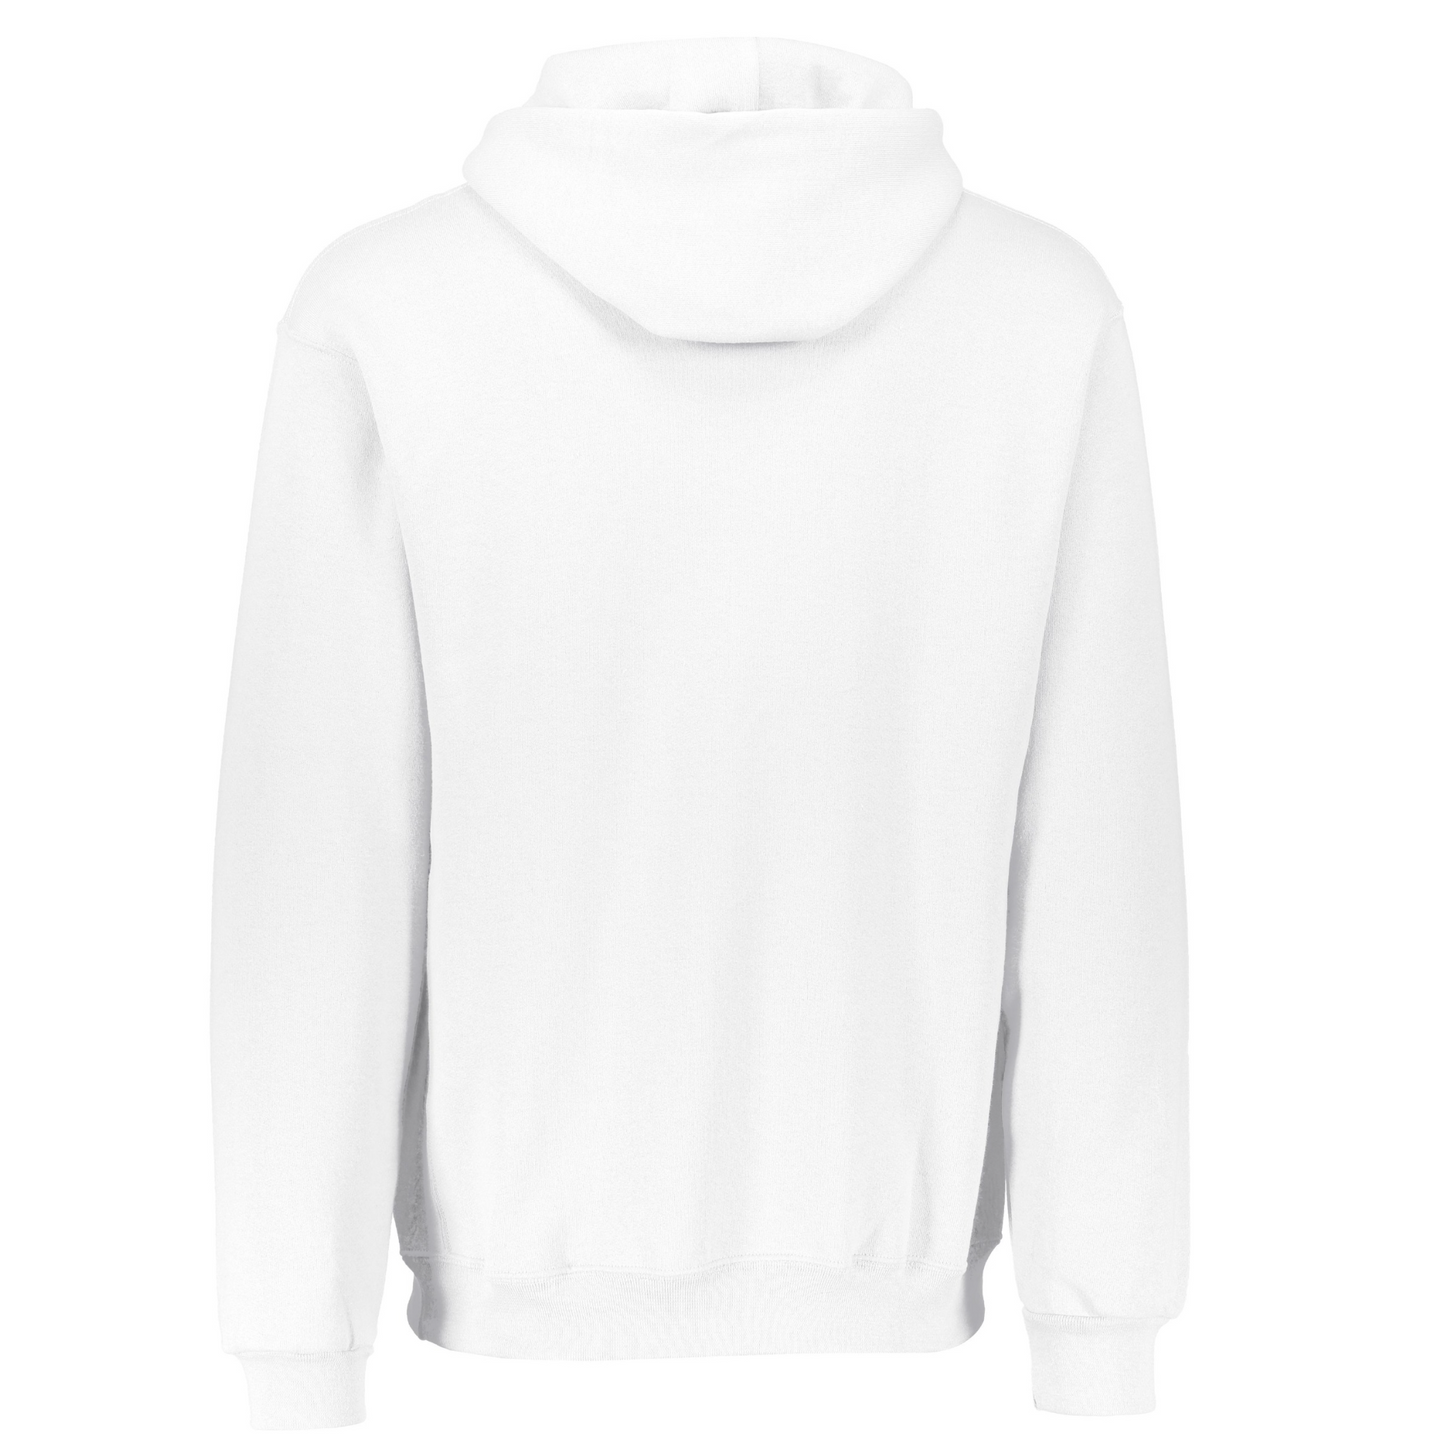 Colonel National Champions Russell Athletic® White Hoodie